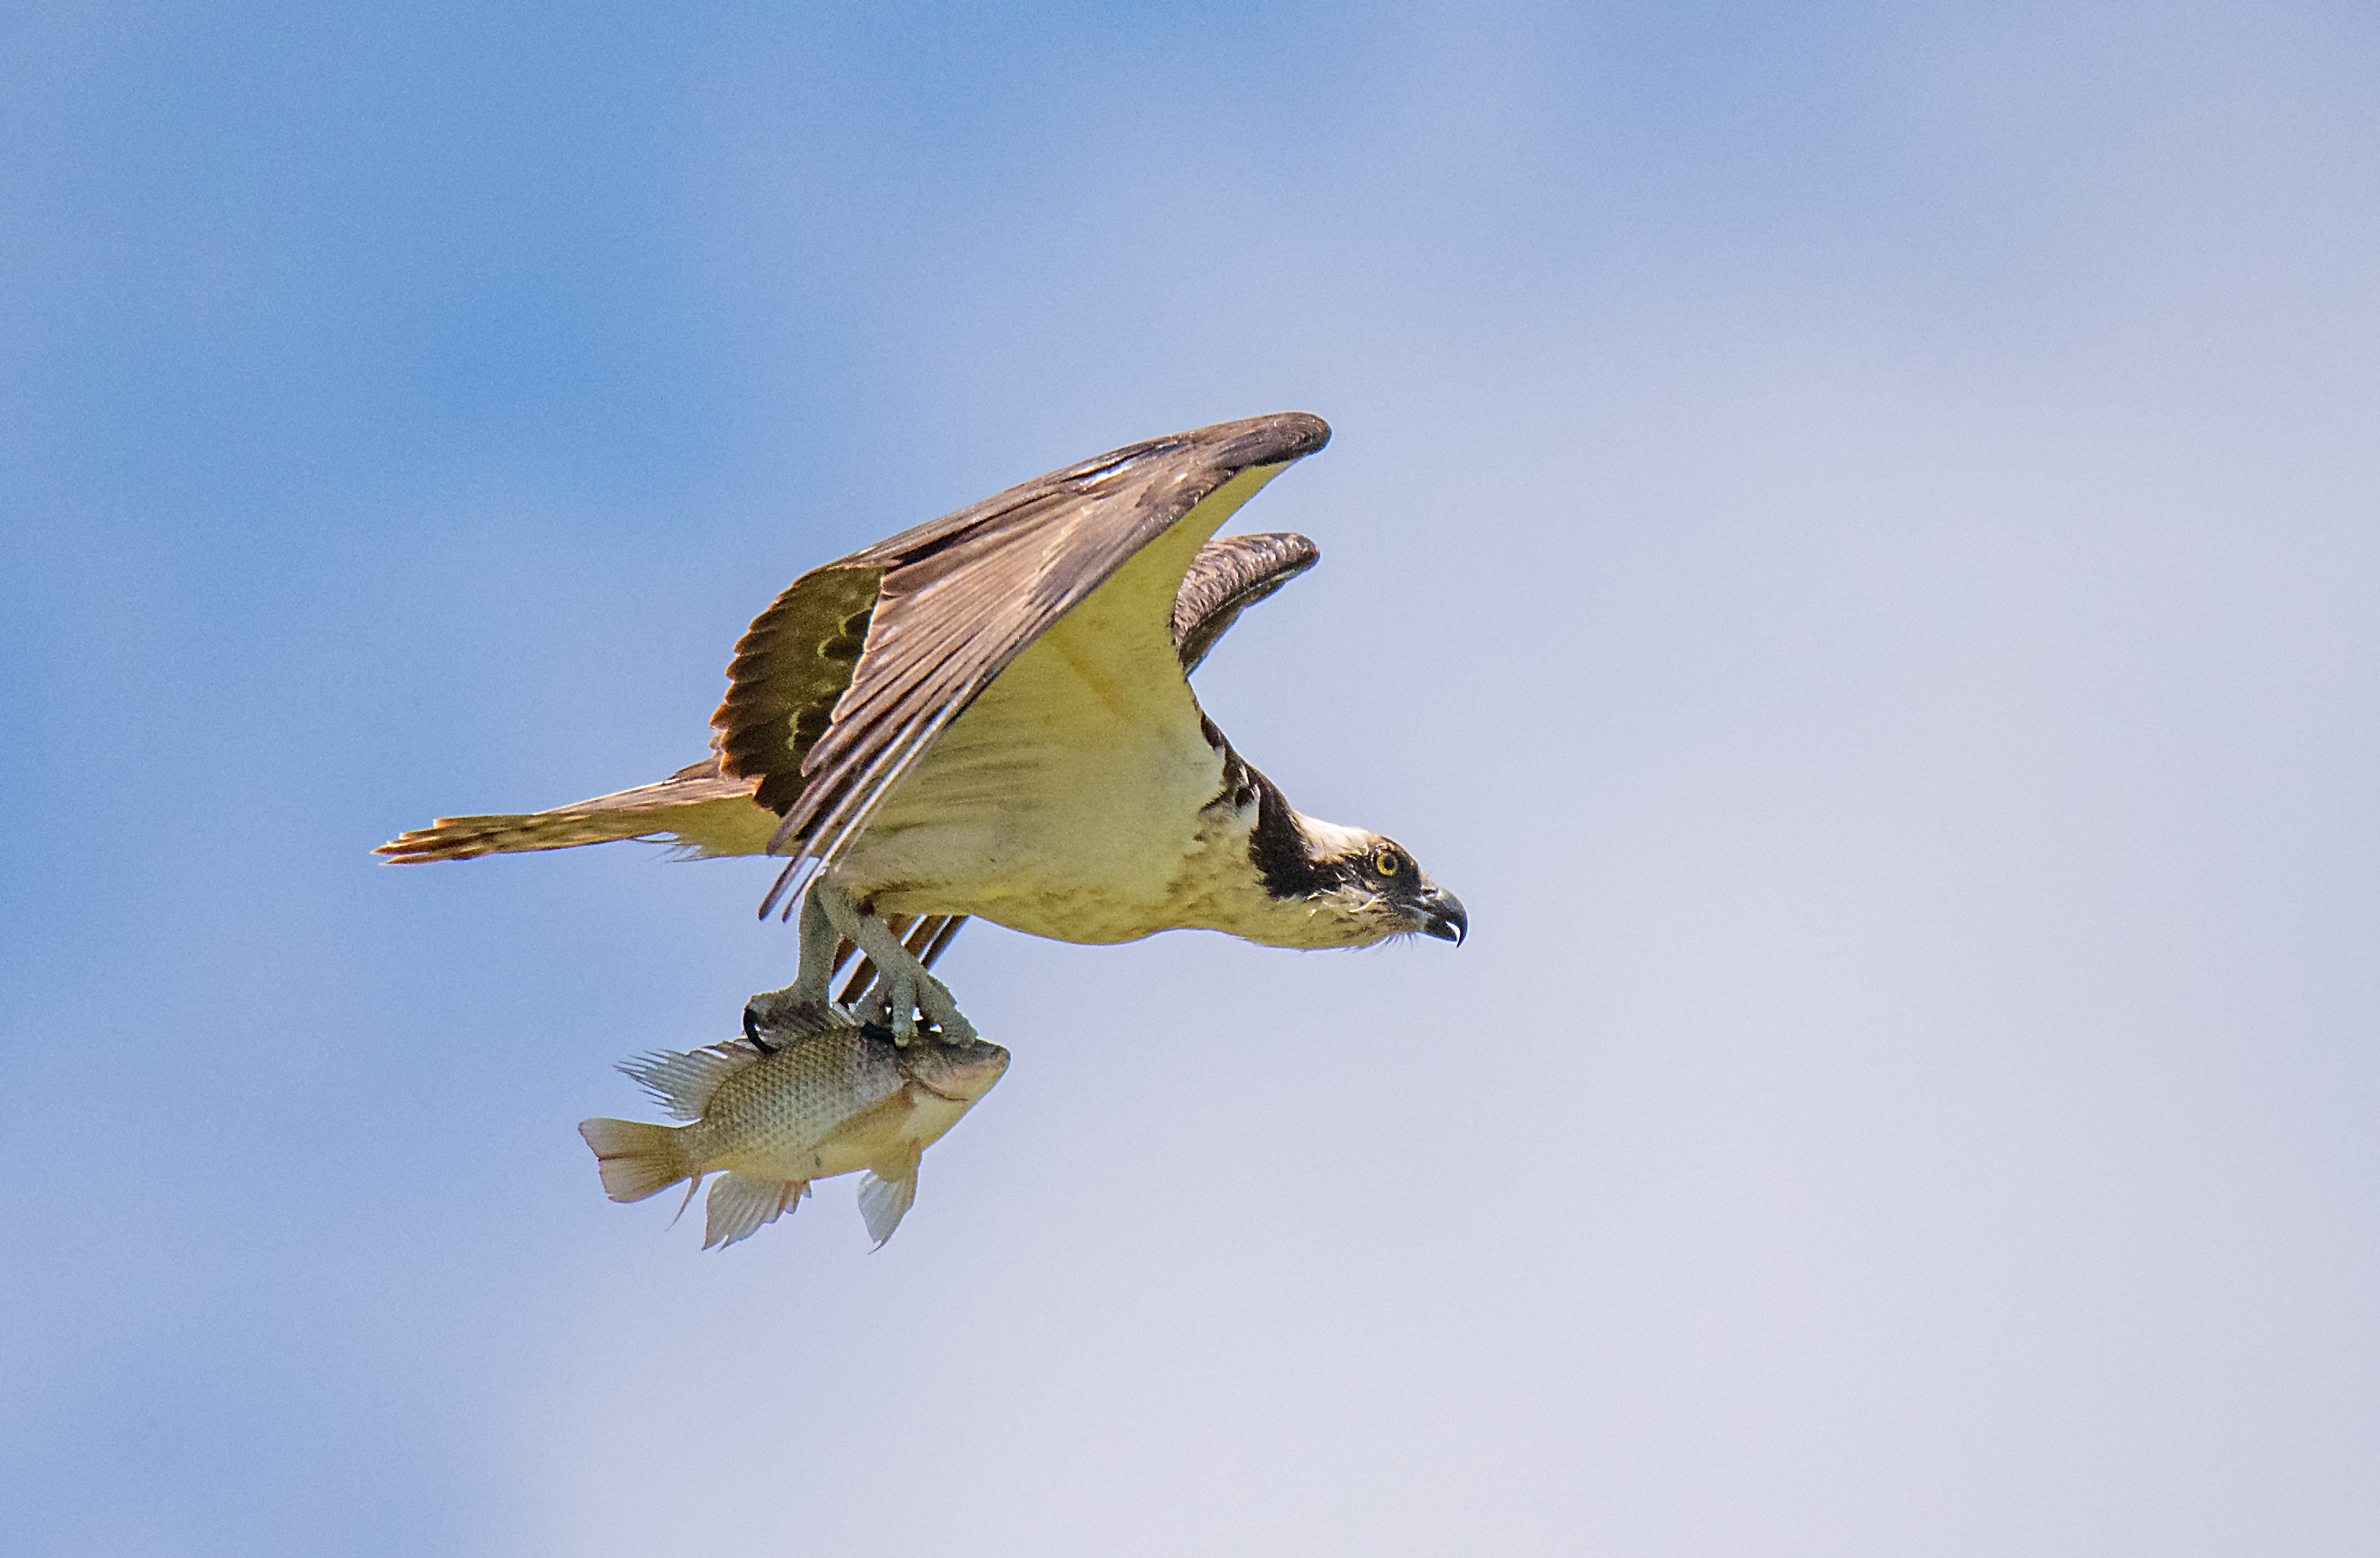 A bird of prey in flight with a fish in its talons.